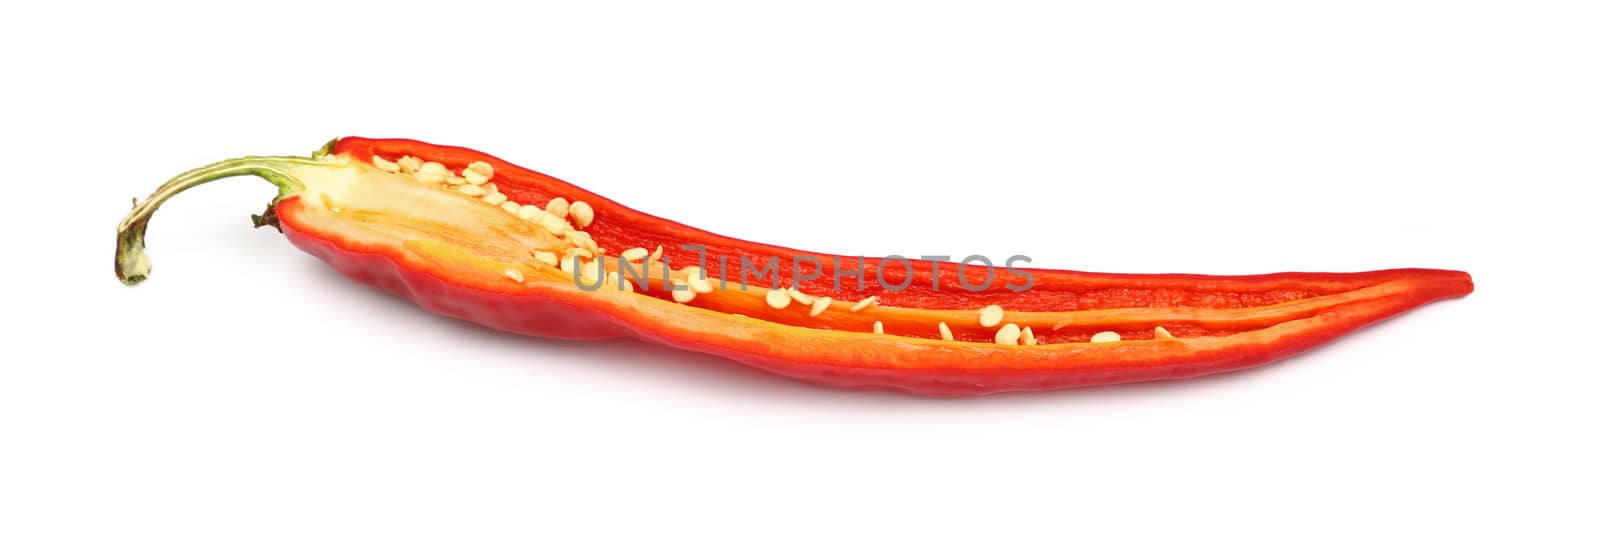 One cut half of fresh red hot chili pepper isolated on white background, close up, low angle view